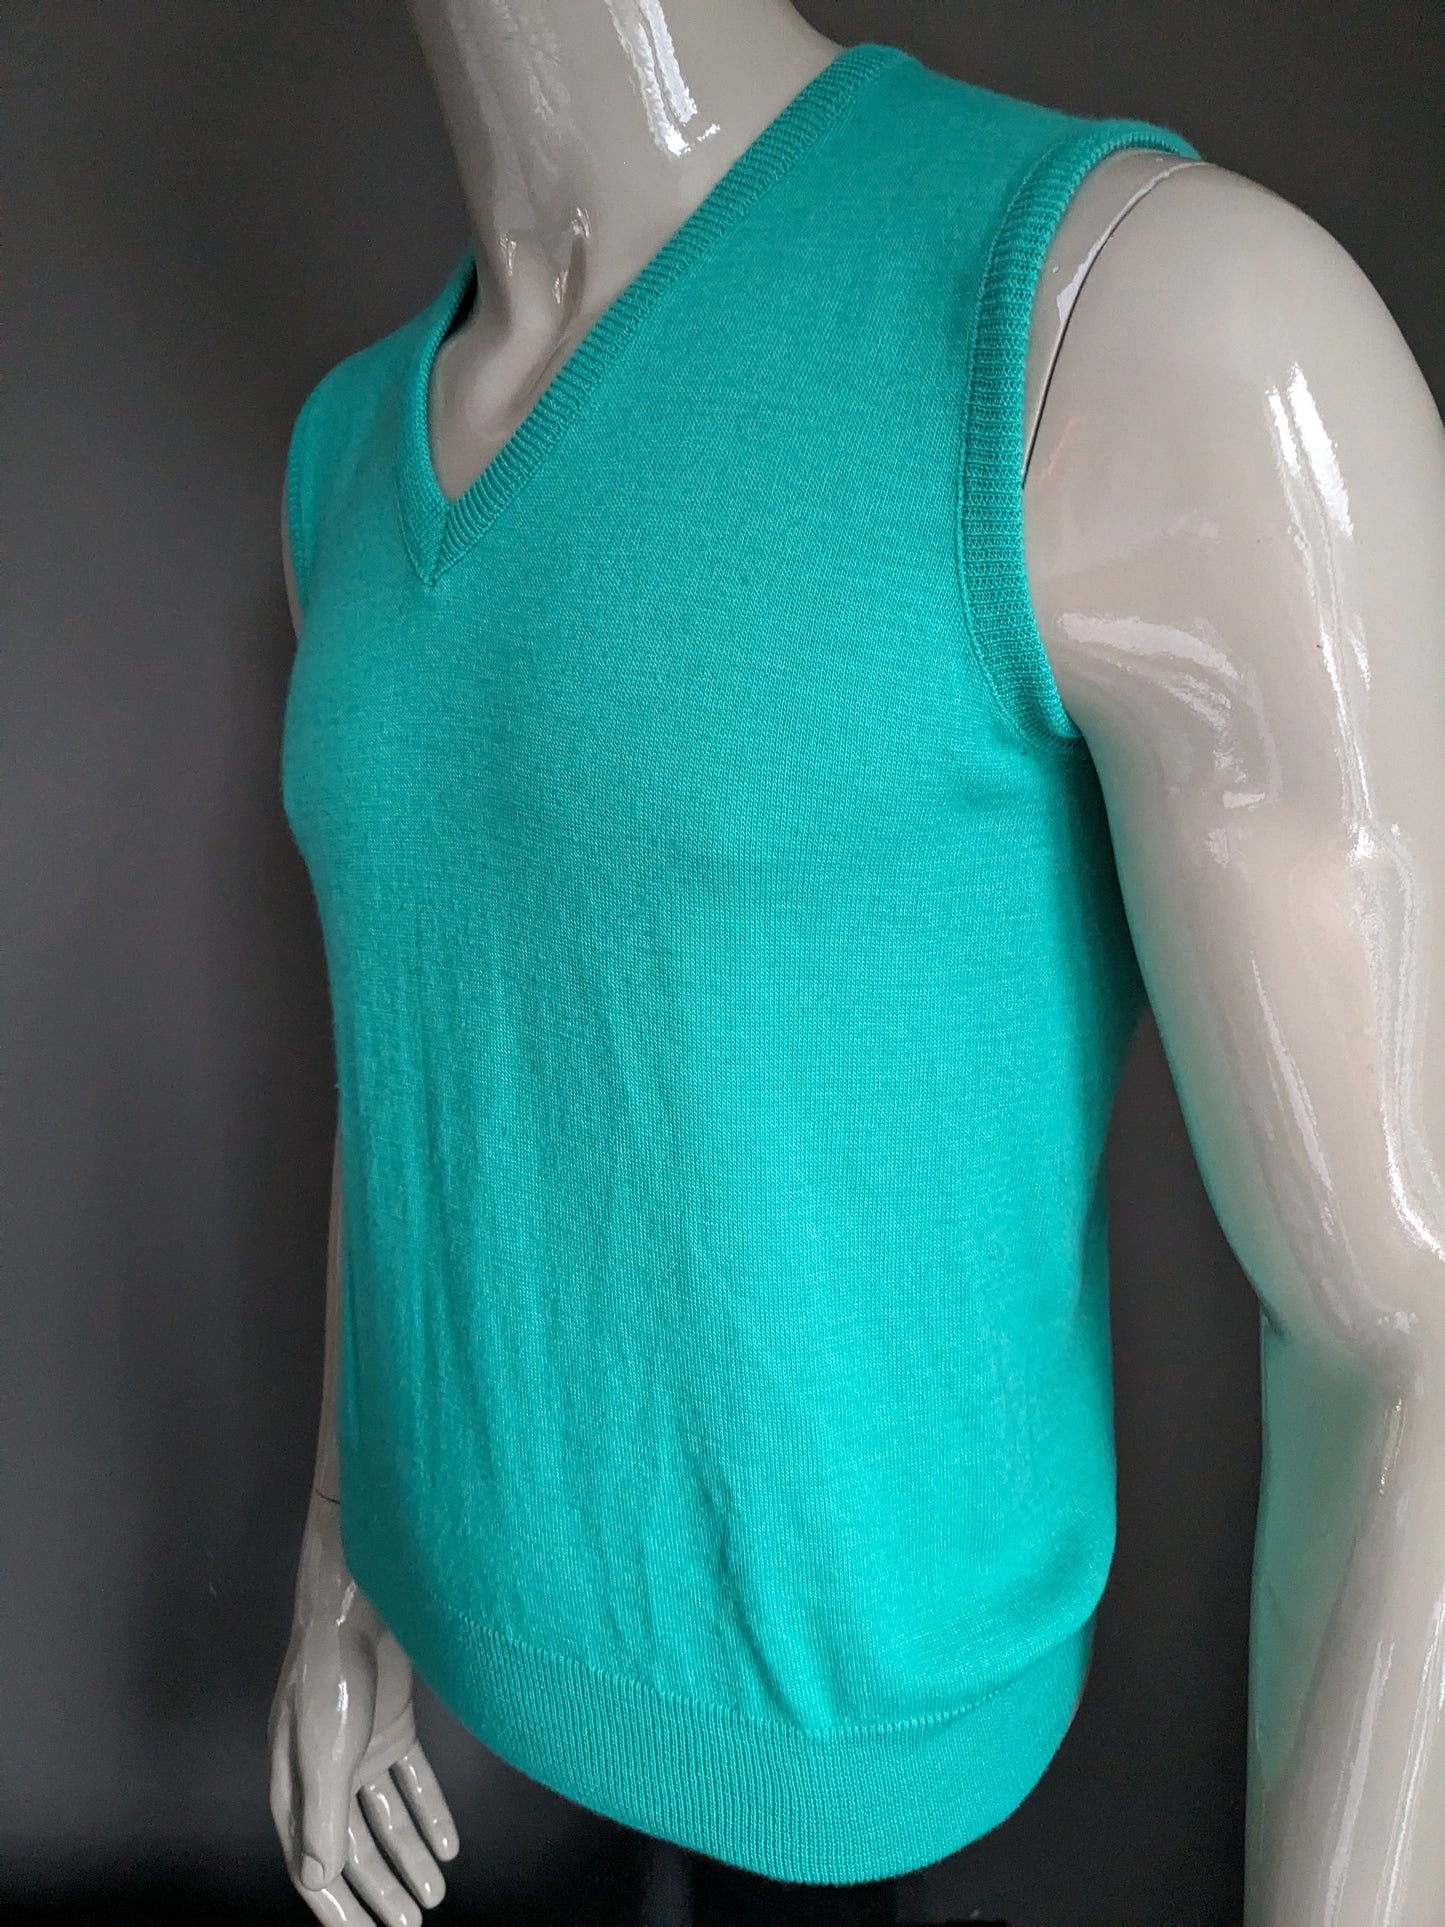 Vintage Sydney lambwool spencer. Colored green. Size M. 50% wool.